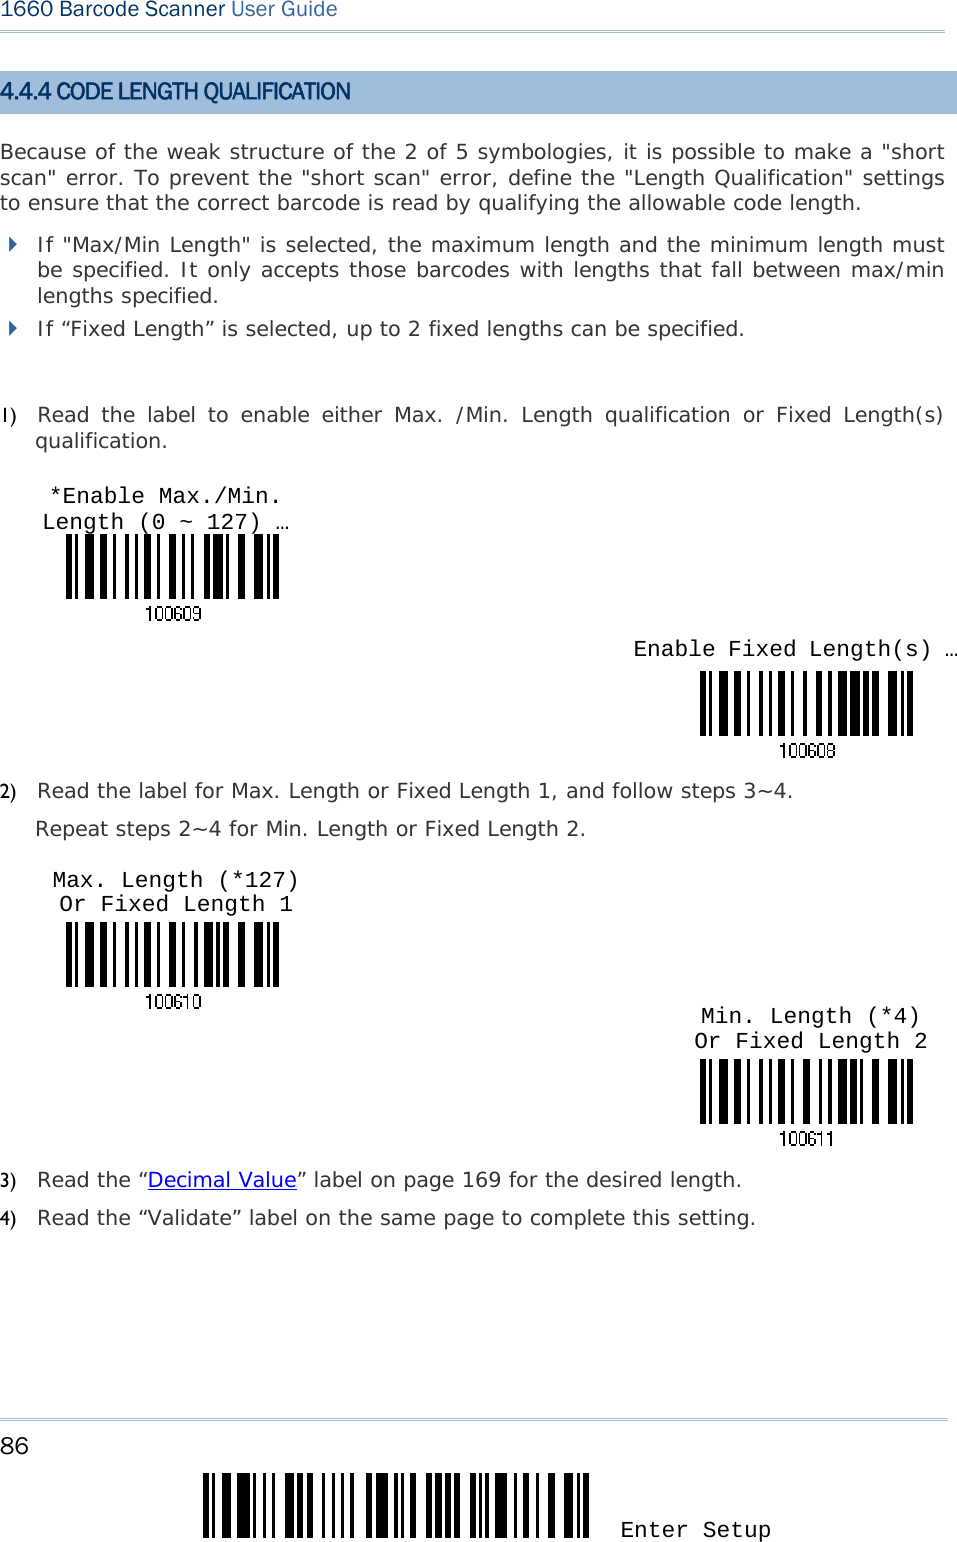 86 Enter Setup 1660 Barcode Scanner User Guide  4.4.4 CODE LENGTH QUALIFICATION Because of the weak structure of the 2 of 5 symbologies, it is possible to make a &quot;short scan&quot; error. To prevent the &quot;short scan&quot; error, define the &quot;Length Qualification&quot; settings to ensure that the correct barcode is read by qualifying the allowable code length.  If &quot;Max/Min Length&quot; is selected, the maximum length and the minimum length must be specified. It only accepts those barcodes with lengths that fall between max/min lengths specified.  If “Fixed Length” is selected, up to 2 fixed lengths can be specified.  1) Read the label to enable either Max. /Min. Length qualification or Fixed Length(s) qualification.    2) Read the label for Max. Length or Fixed Length 1, and follow steps 3~4. Repeat steps 2~4 for Min. Length or Fixed Length 2.    3) Read the “Decimal Value” label on page 169 for the desired length.  4) Read the “Validate” label on the same page to complete this setting.    Enable Fixed Length(s) …*Enable Max./Min. Length (0 ~ 127) … Min. Length (*4) Or Fixed Length 2 Max. Length (*127) Or Fixed Length 1 